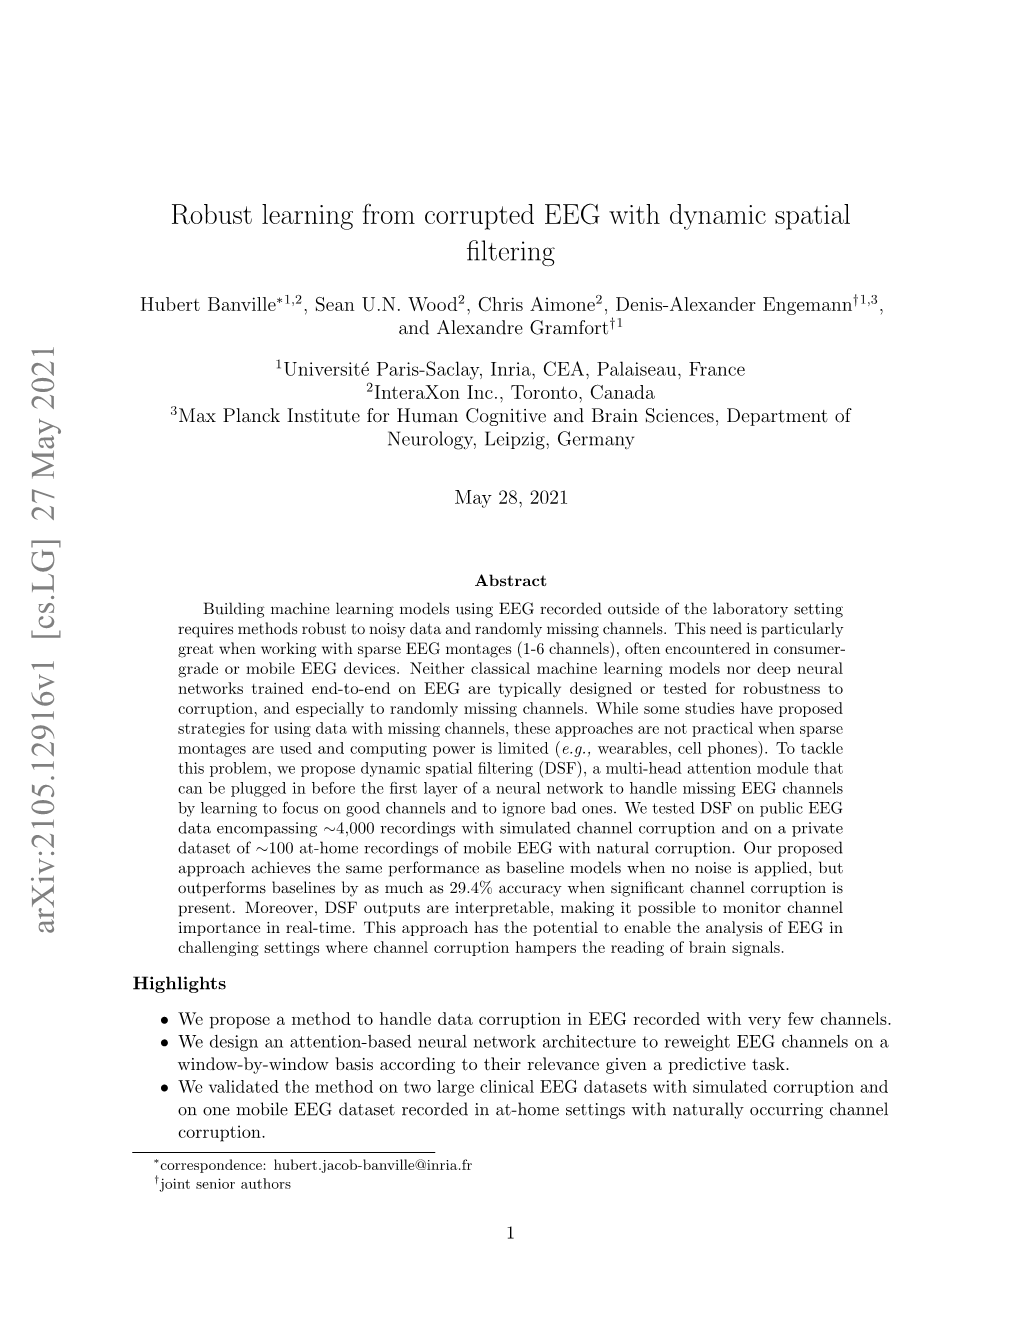 Robust Learning from Corrupted EEG with Dynamic Spatial Filtering